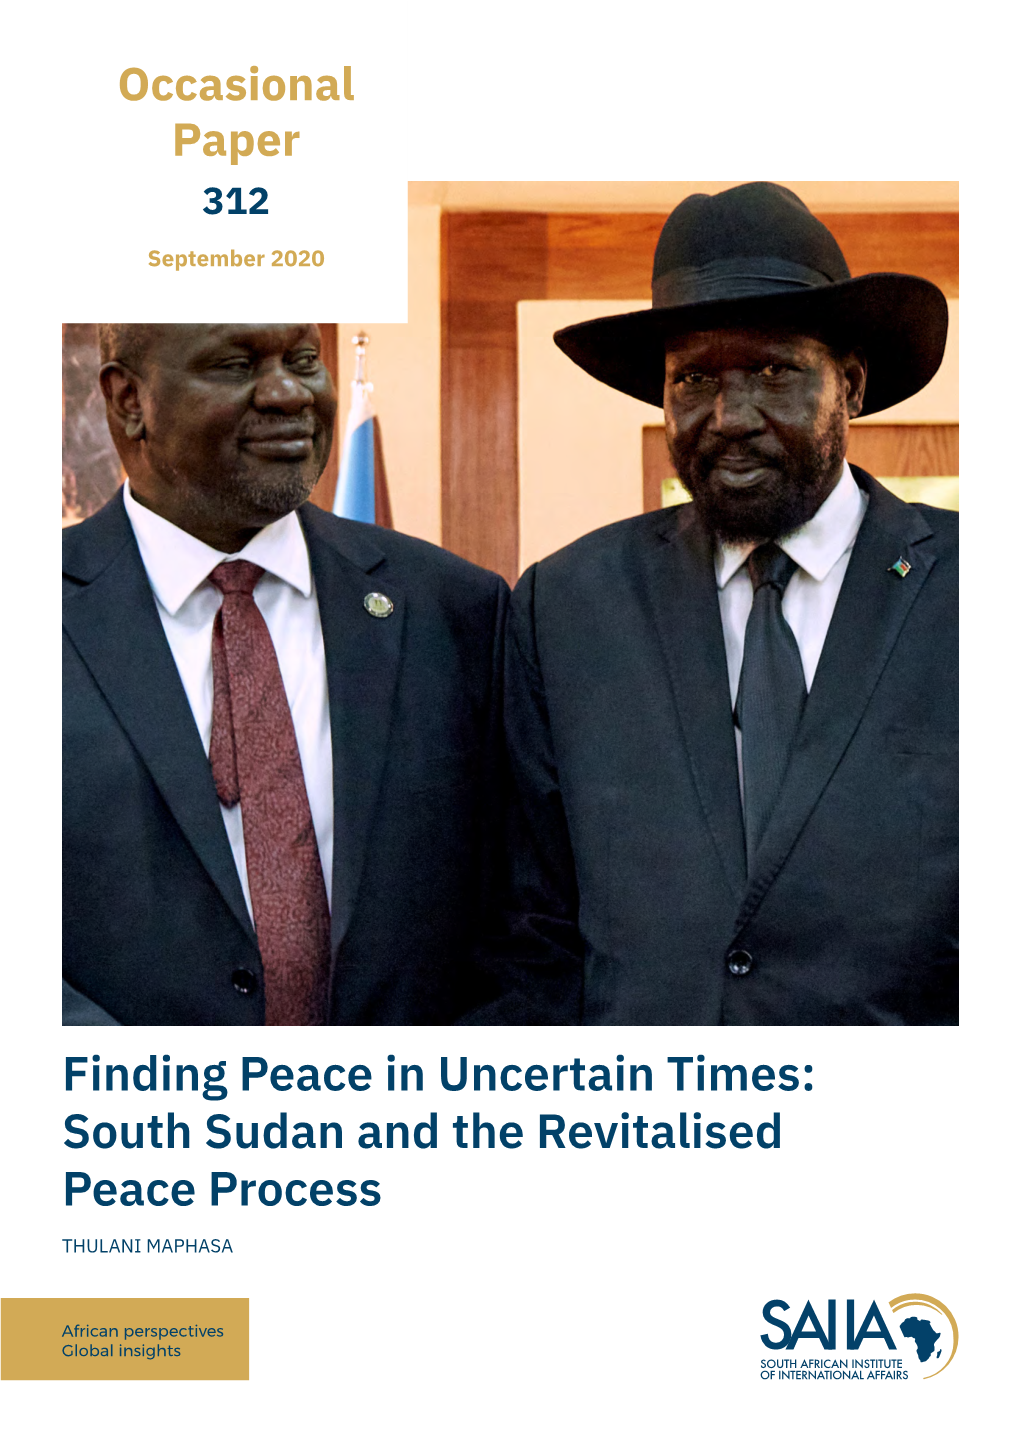 South Sudan and the Revitalised Peace Process